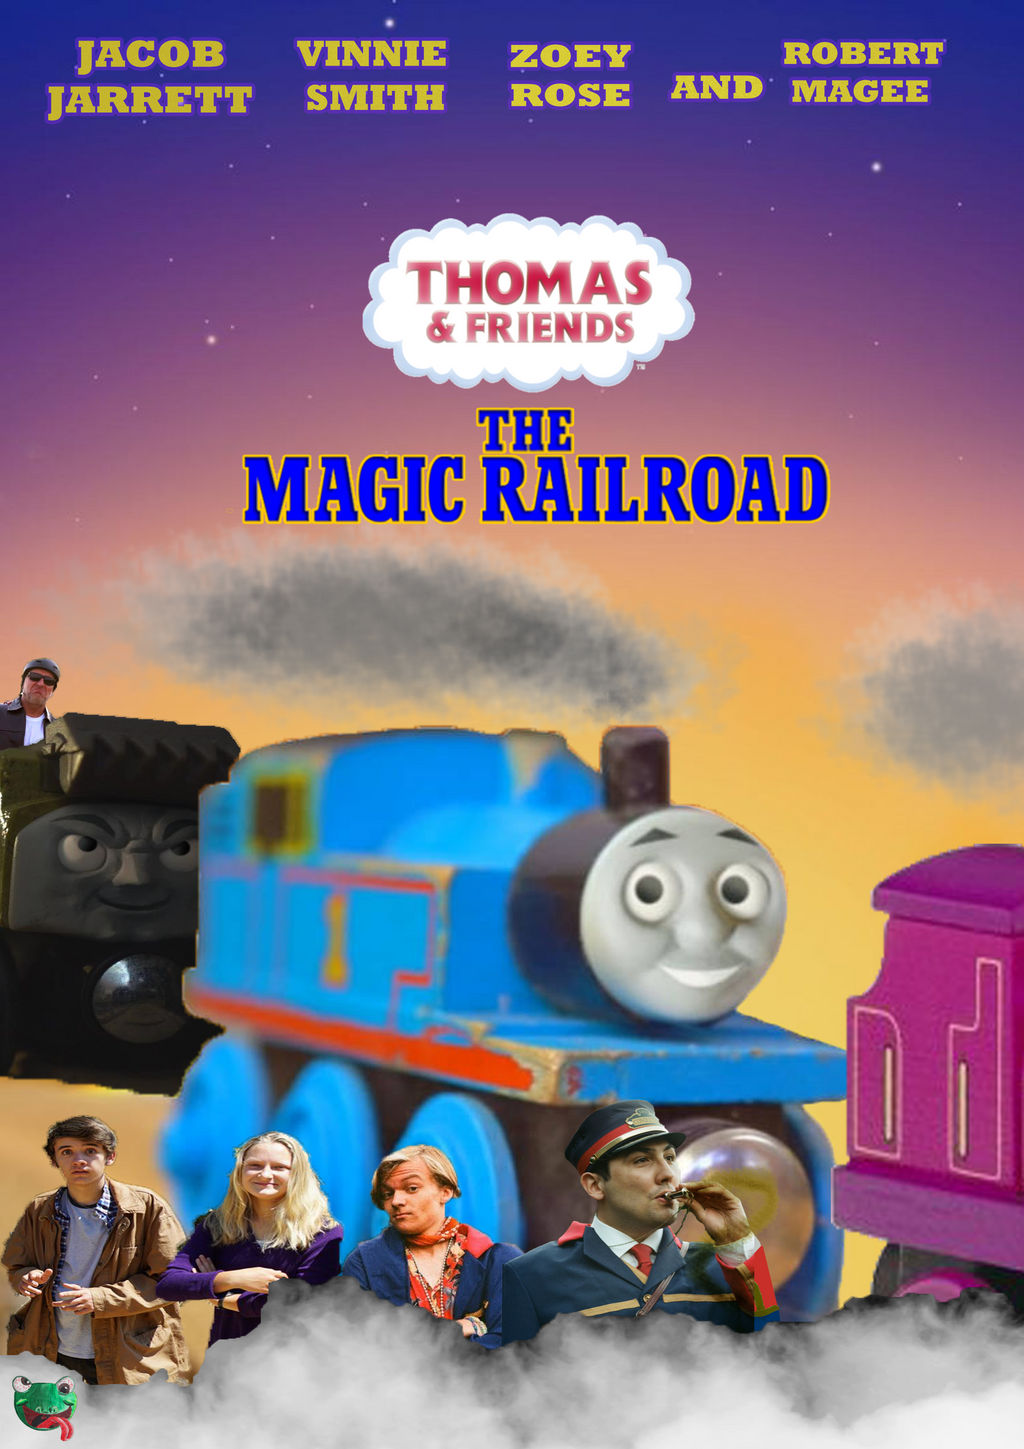 The Magic Railroad Official Theatrical Poster 2 By Trainboy55 On Deviantart - roblox magic railroad